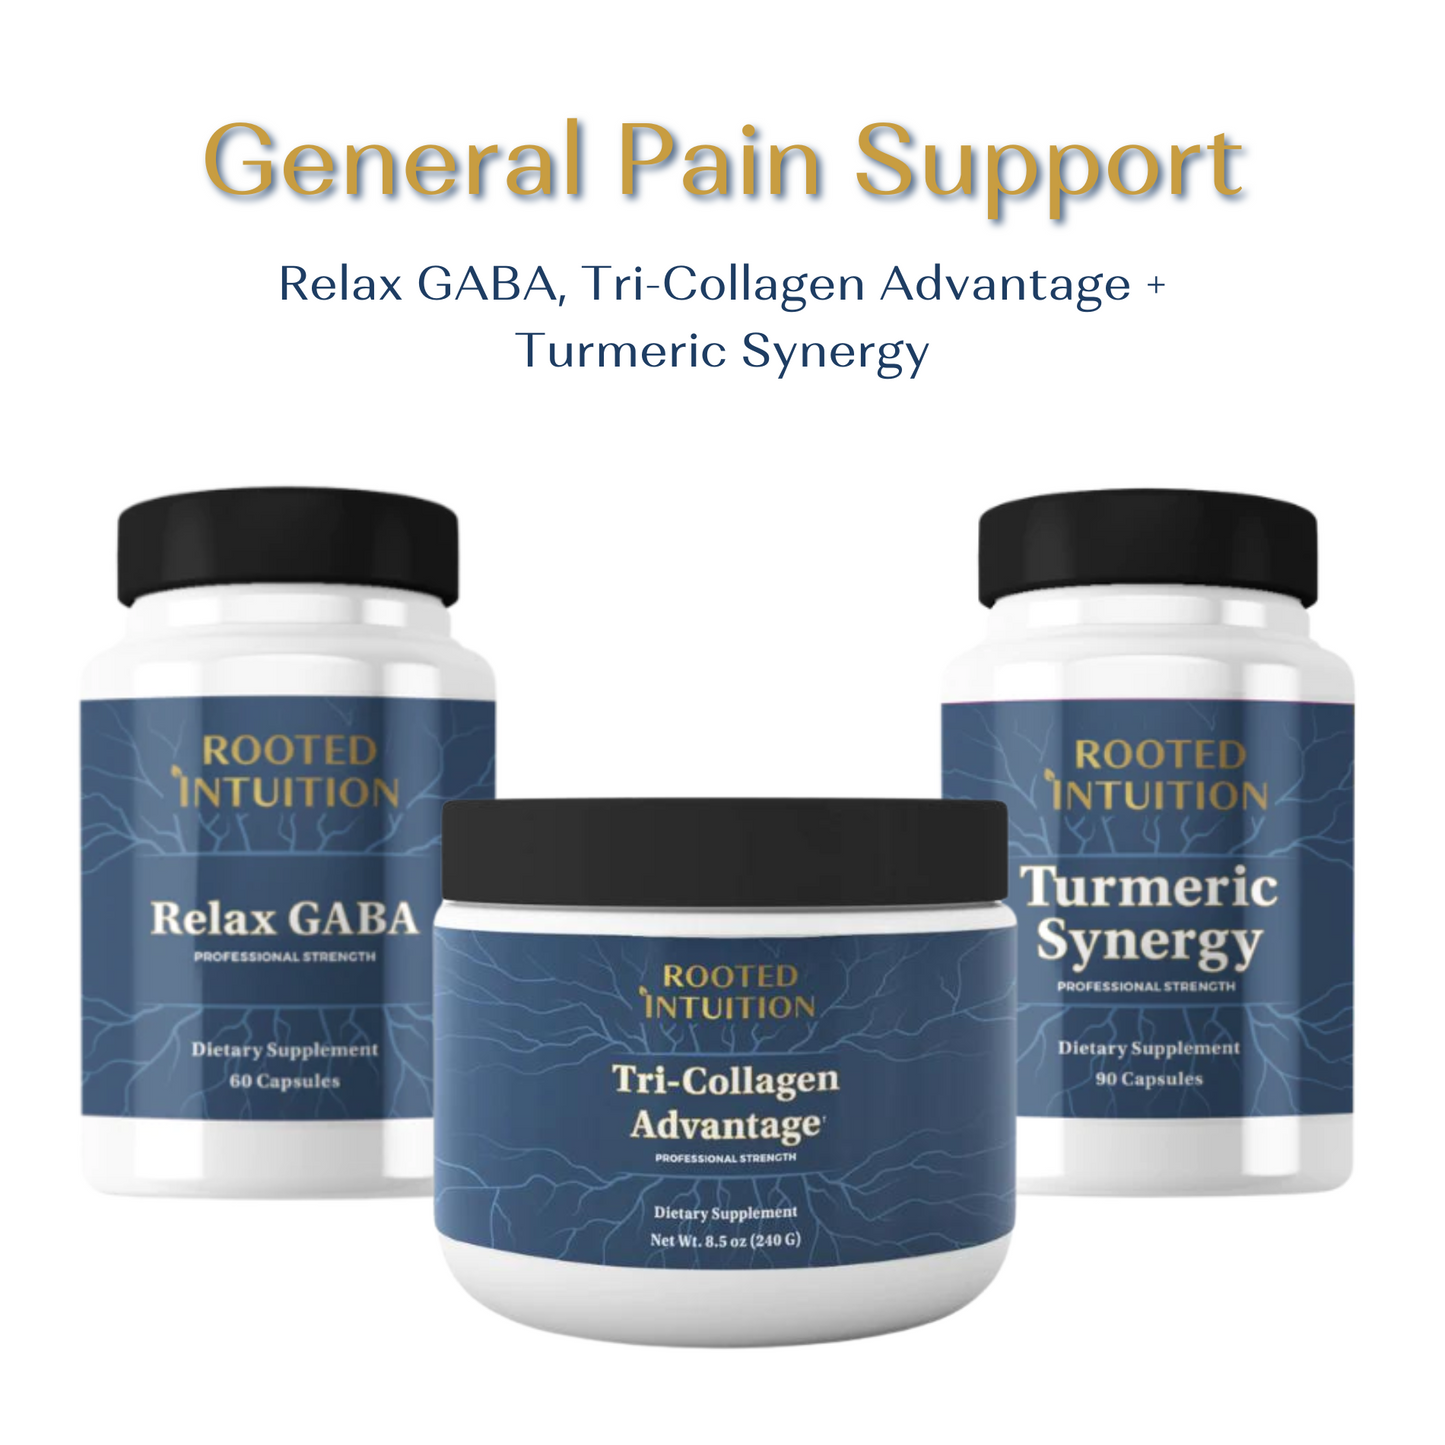 General Pain Support